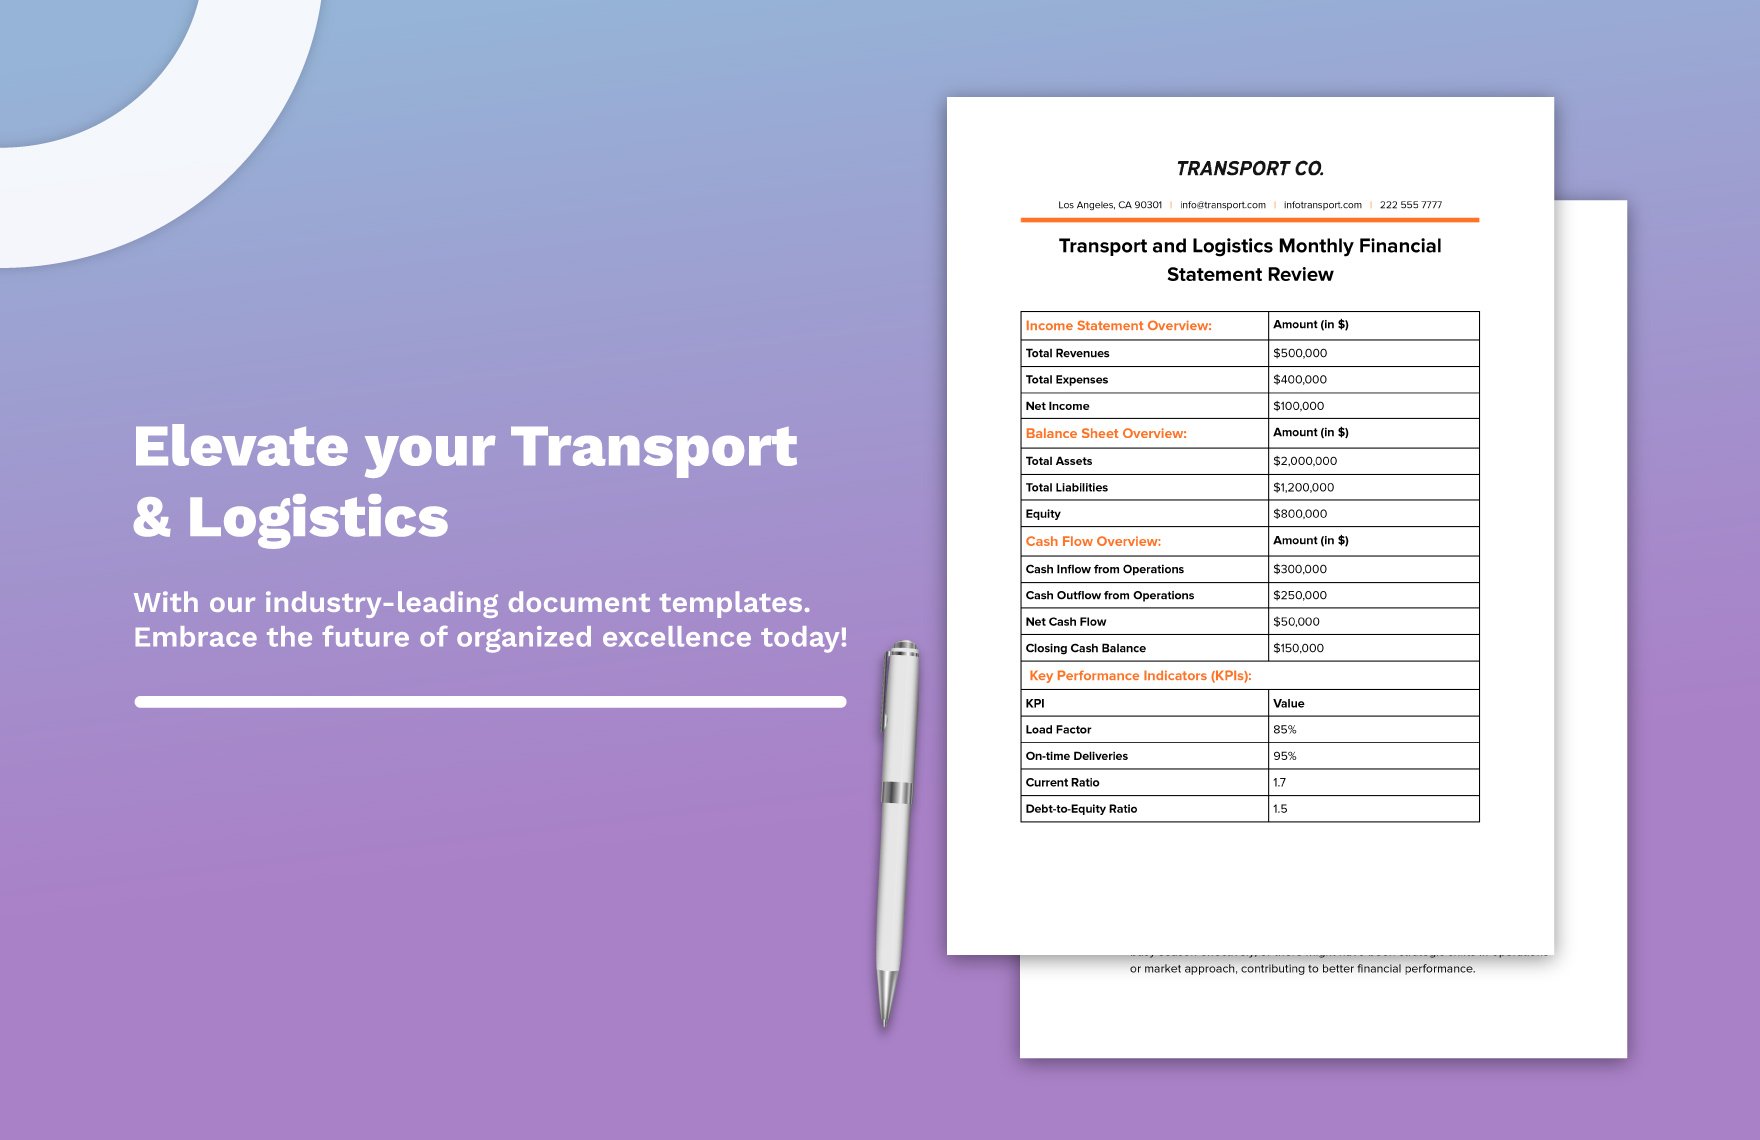 Transport and Logistics Monthly Financial Statement Review Template